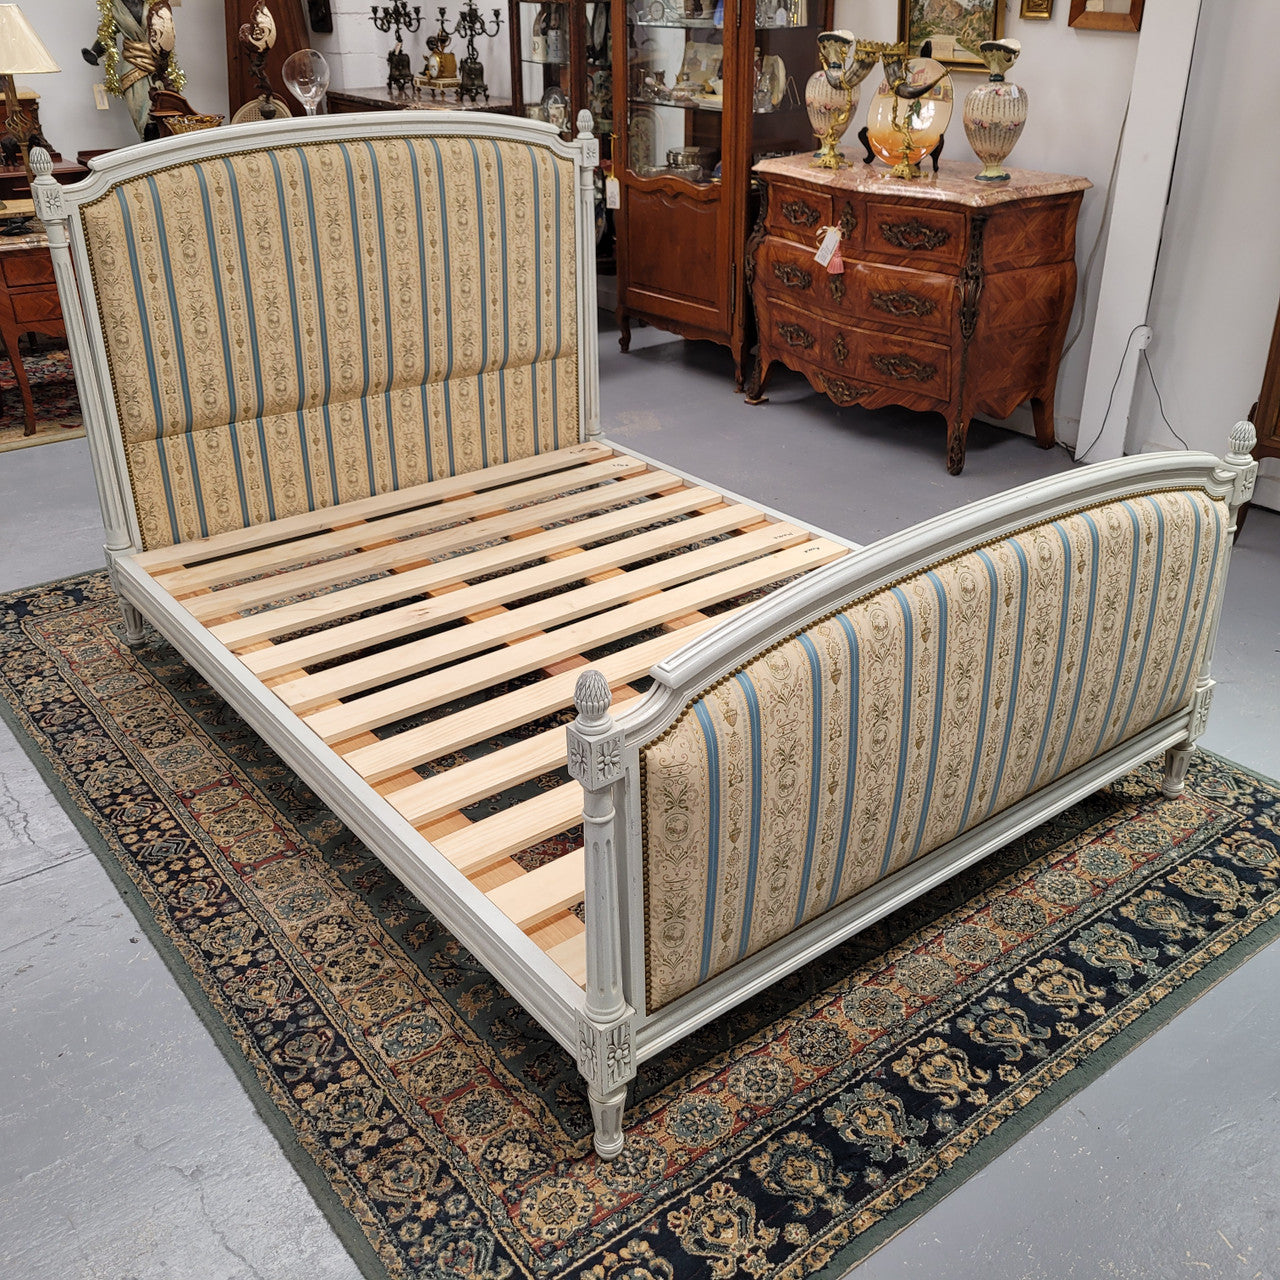 French Louis 16th style double bed and rails with original crackle paint. It also has good quality upholstery. Bed comes complete with custom made slats. Just place your mattress on top. Sourced from France and in good original detailed condition.